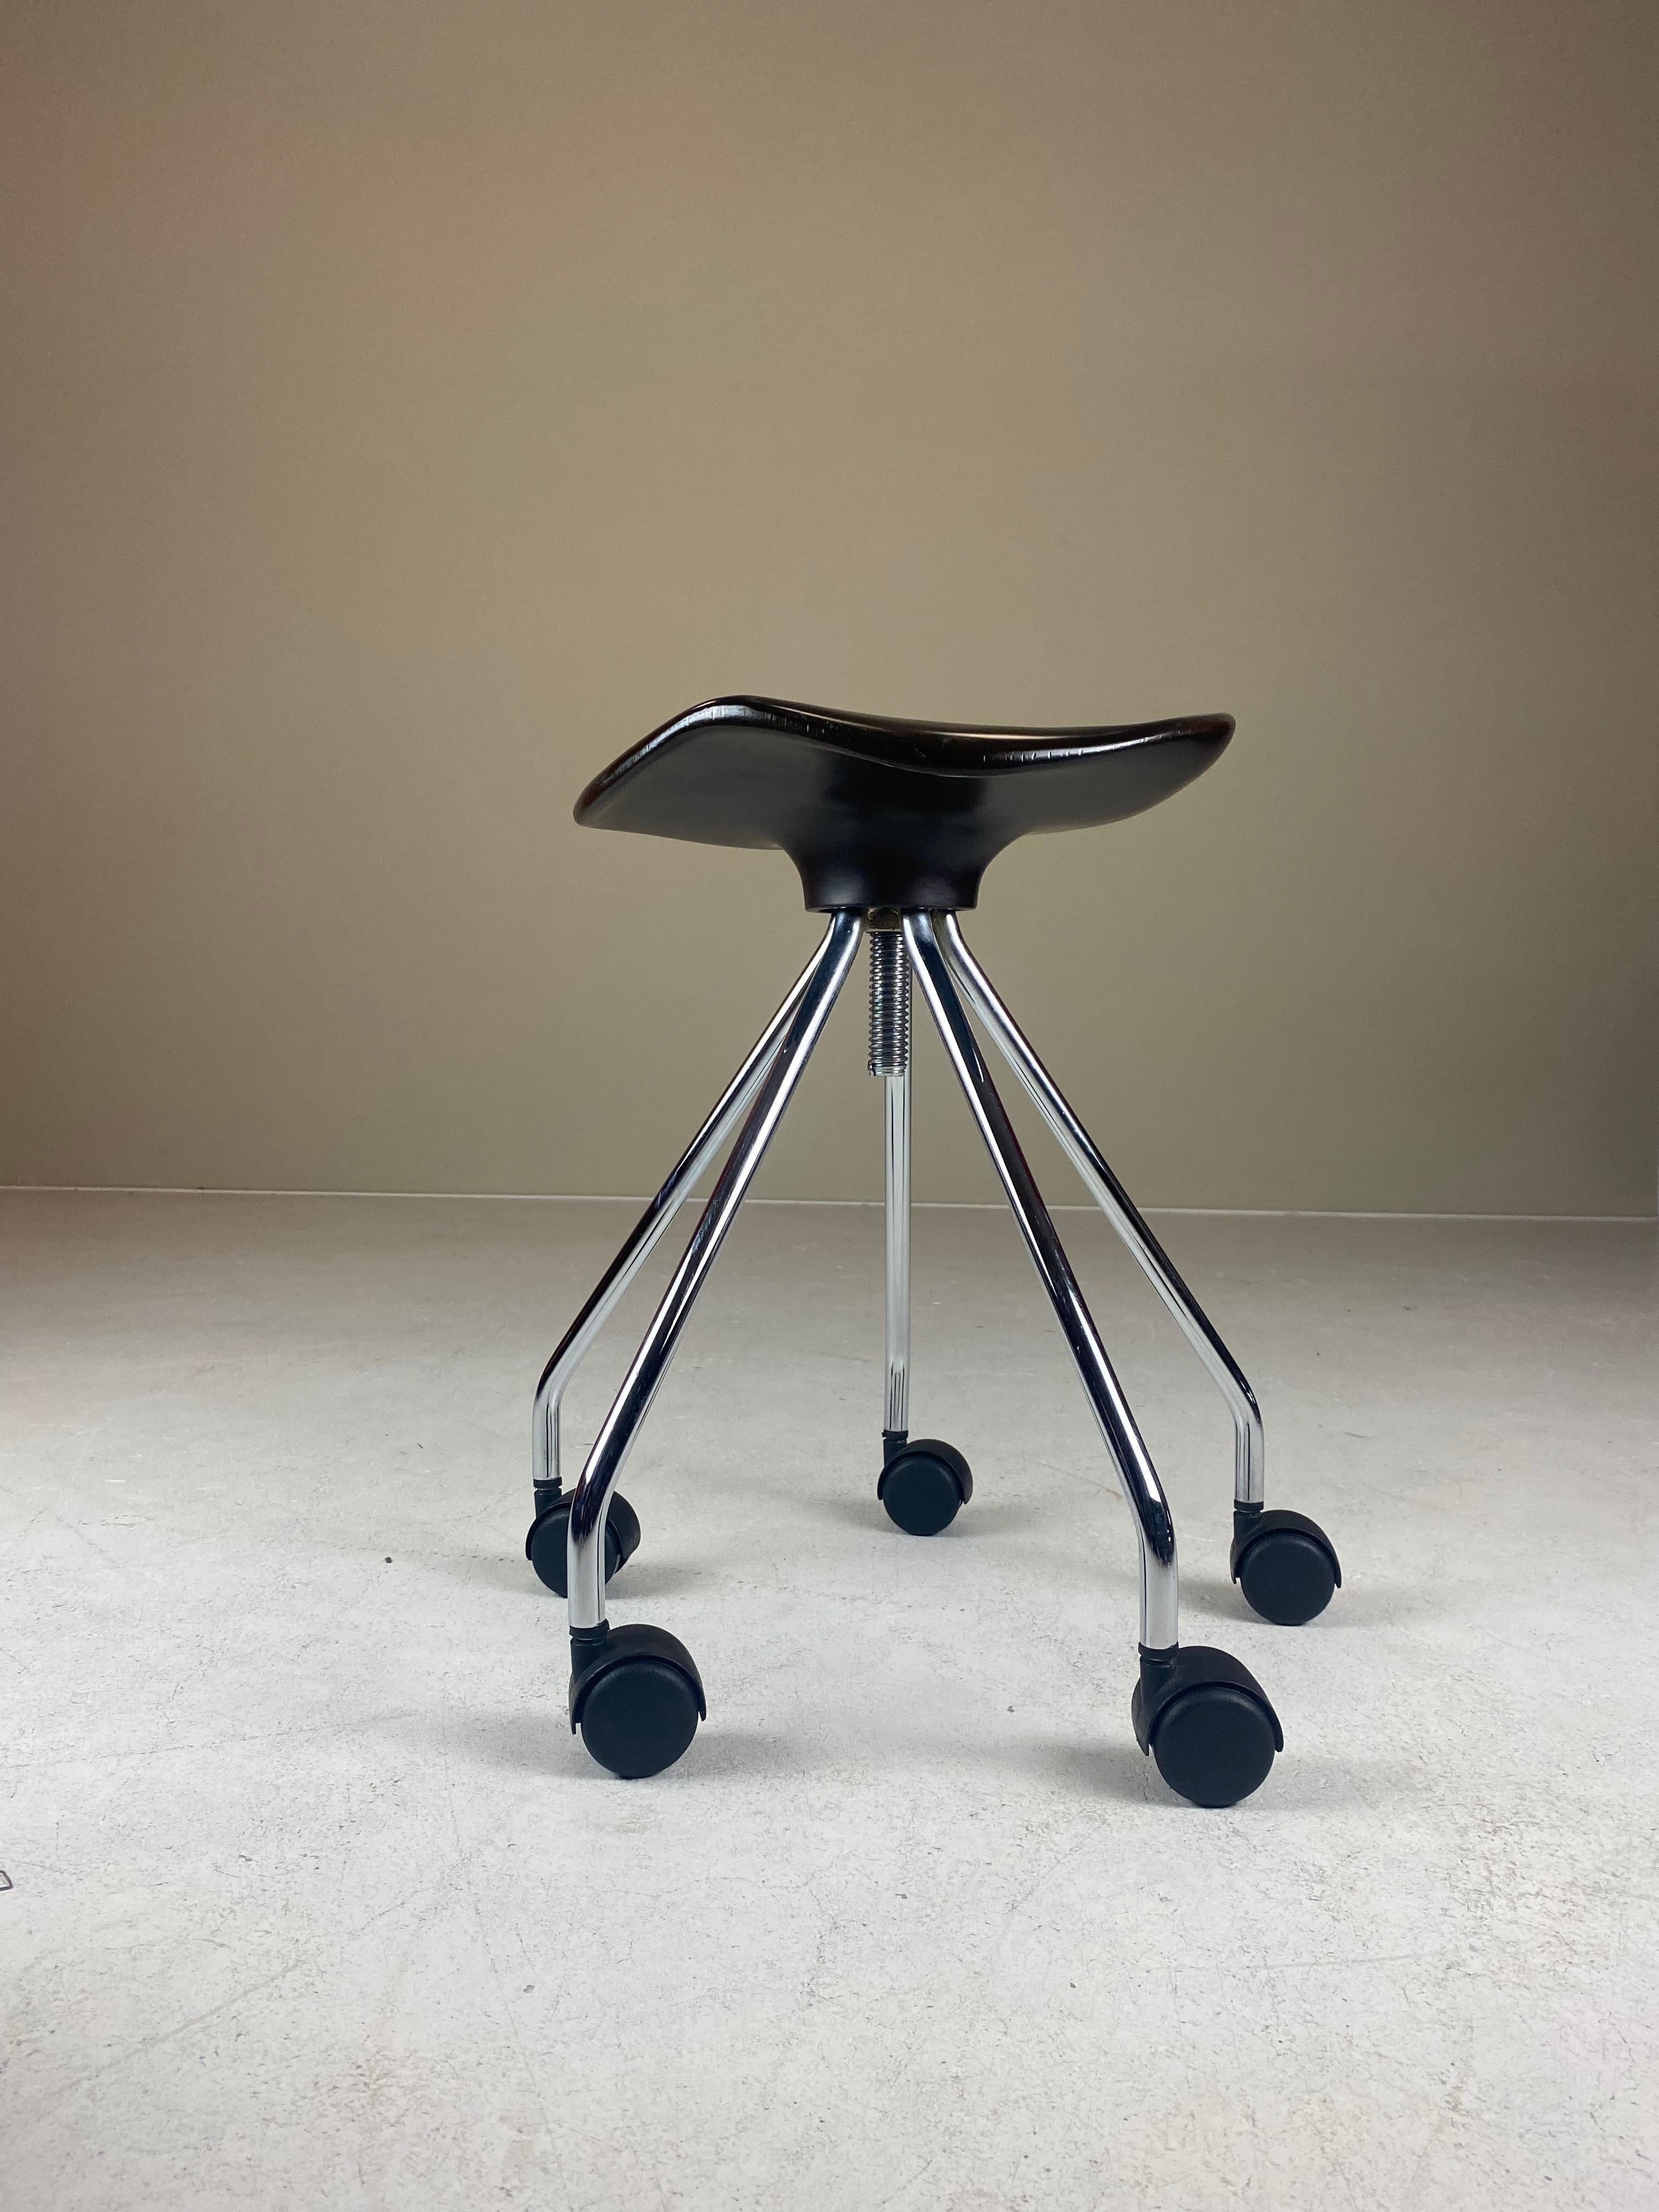 In his early design career, dating back to the 1960s, Spanish designer Pepe Cortès has been recognized with multiple design awards. However, he designed his best piece in the 1990s: the iconic Jamaica stool.

Originally produced by Amat-3 in 1993,